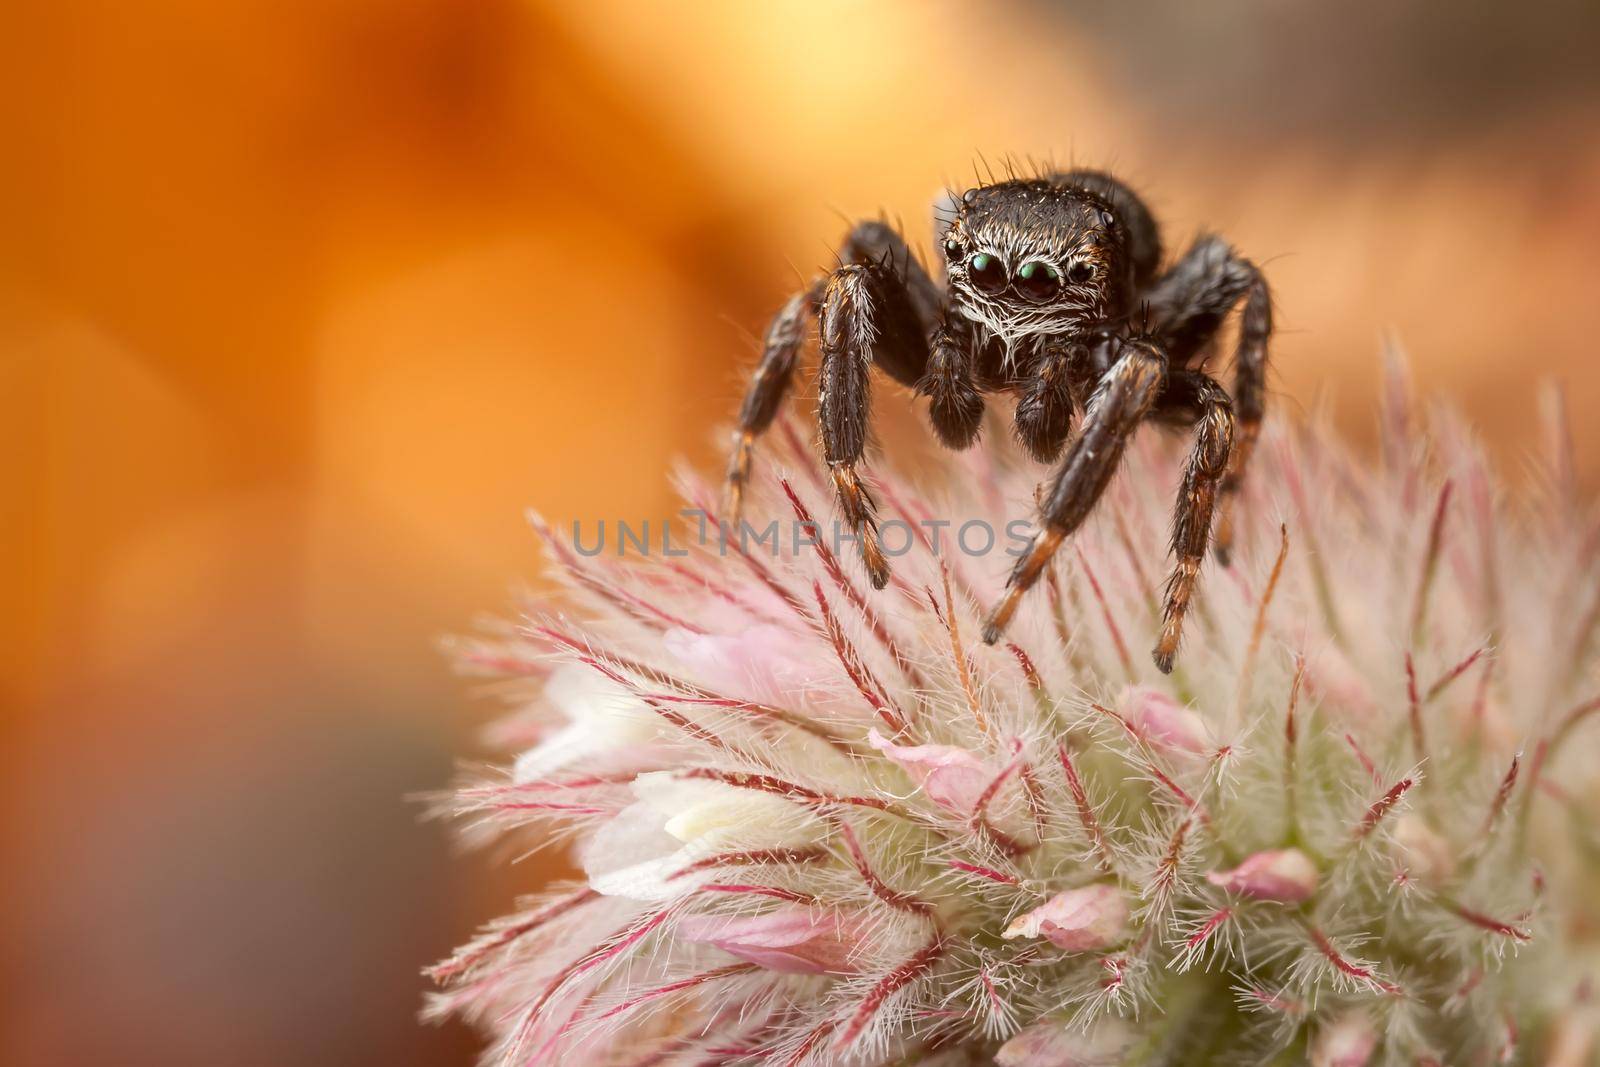 Jumping spider on colored nice fluffy plant